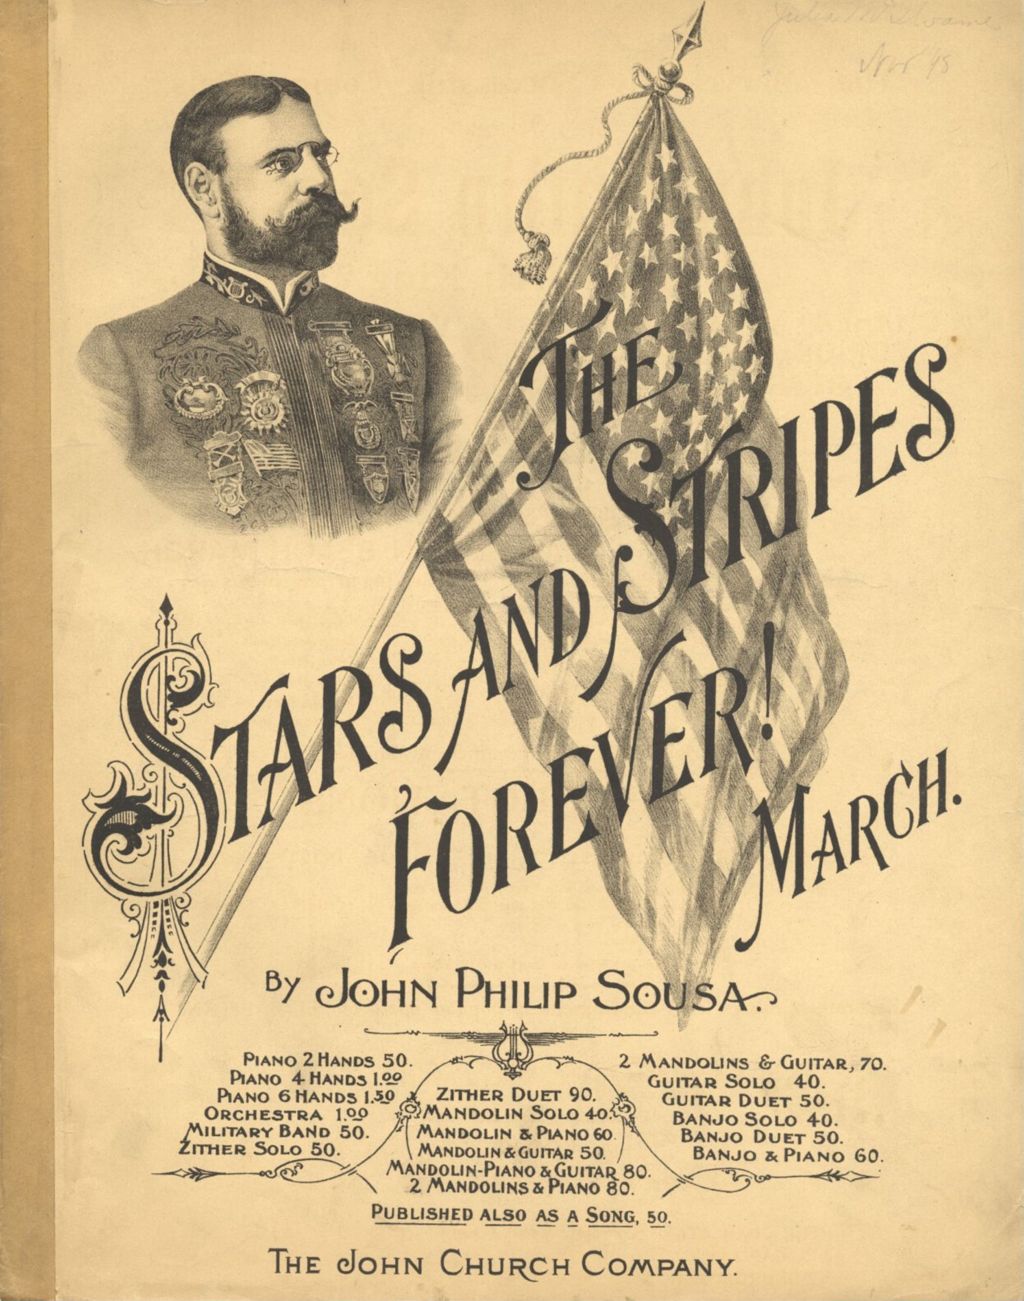 Stars and Stripes Forever (March)